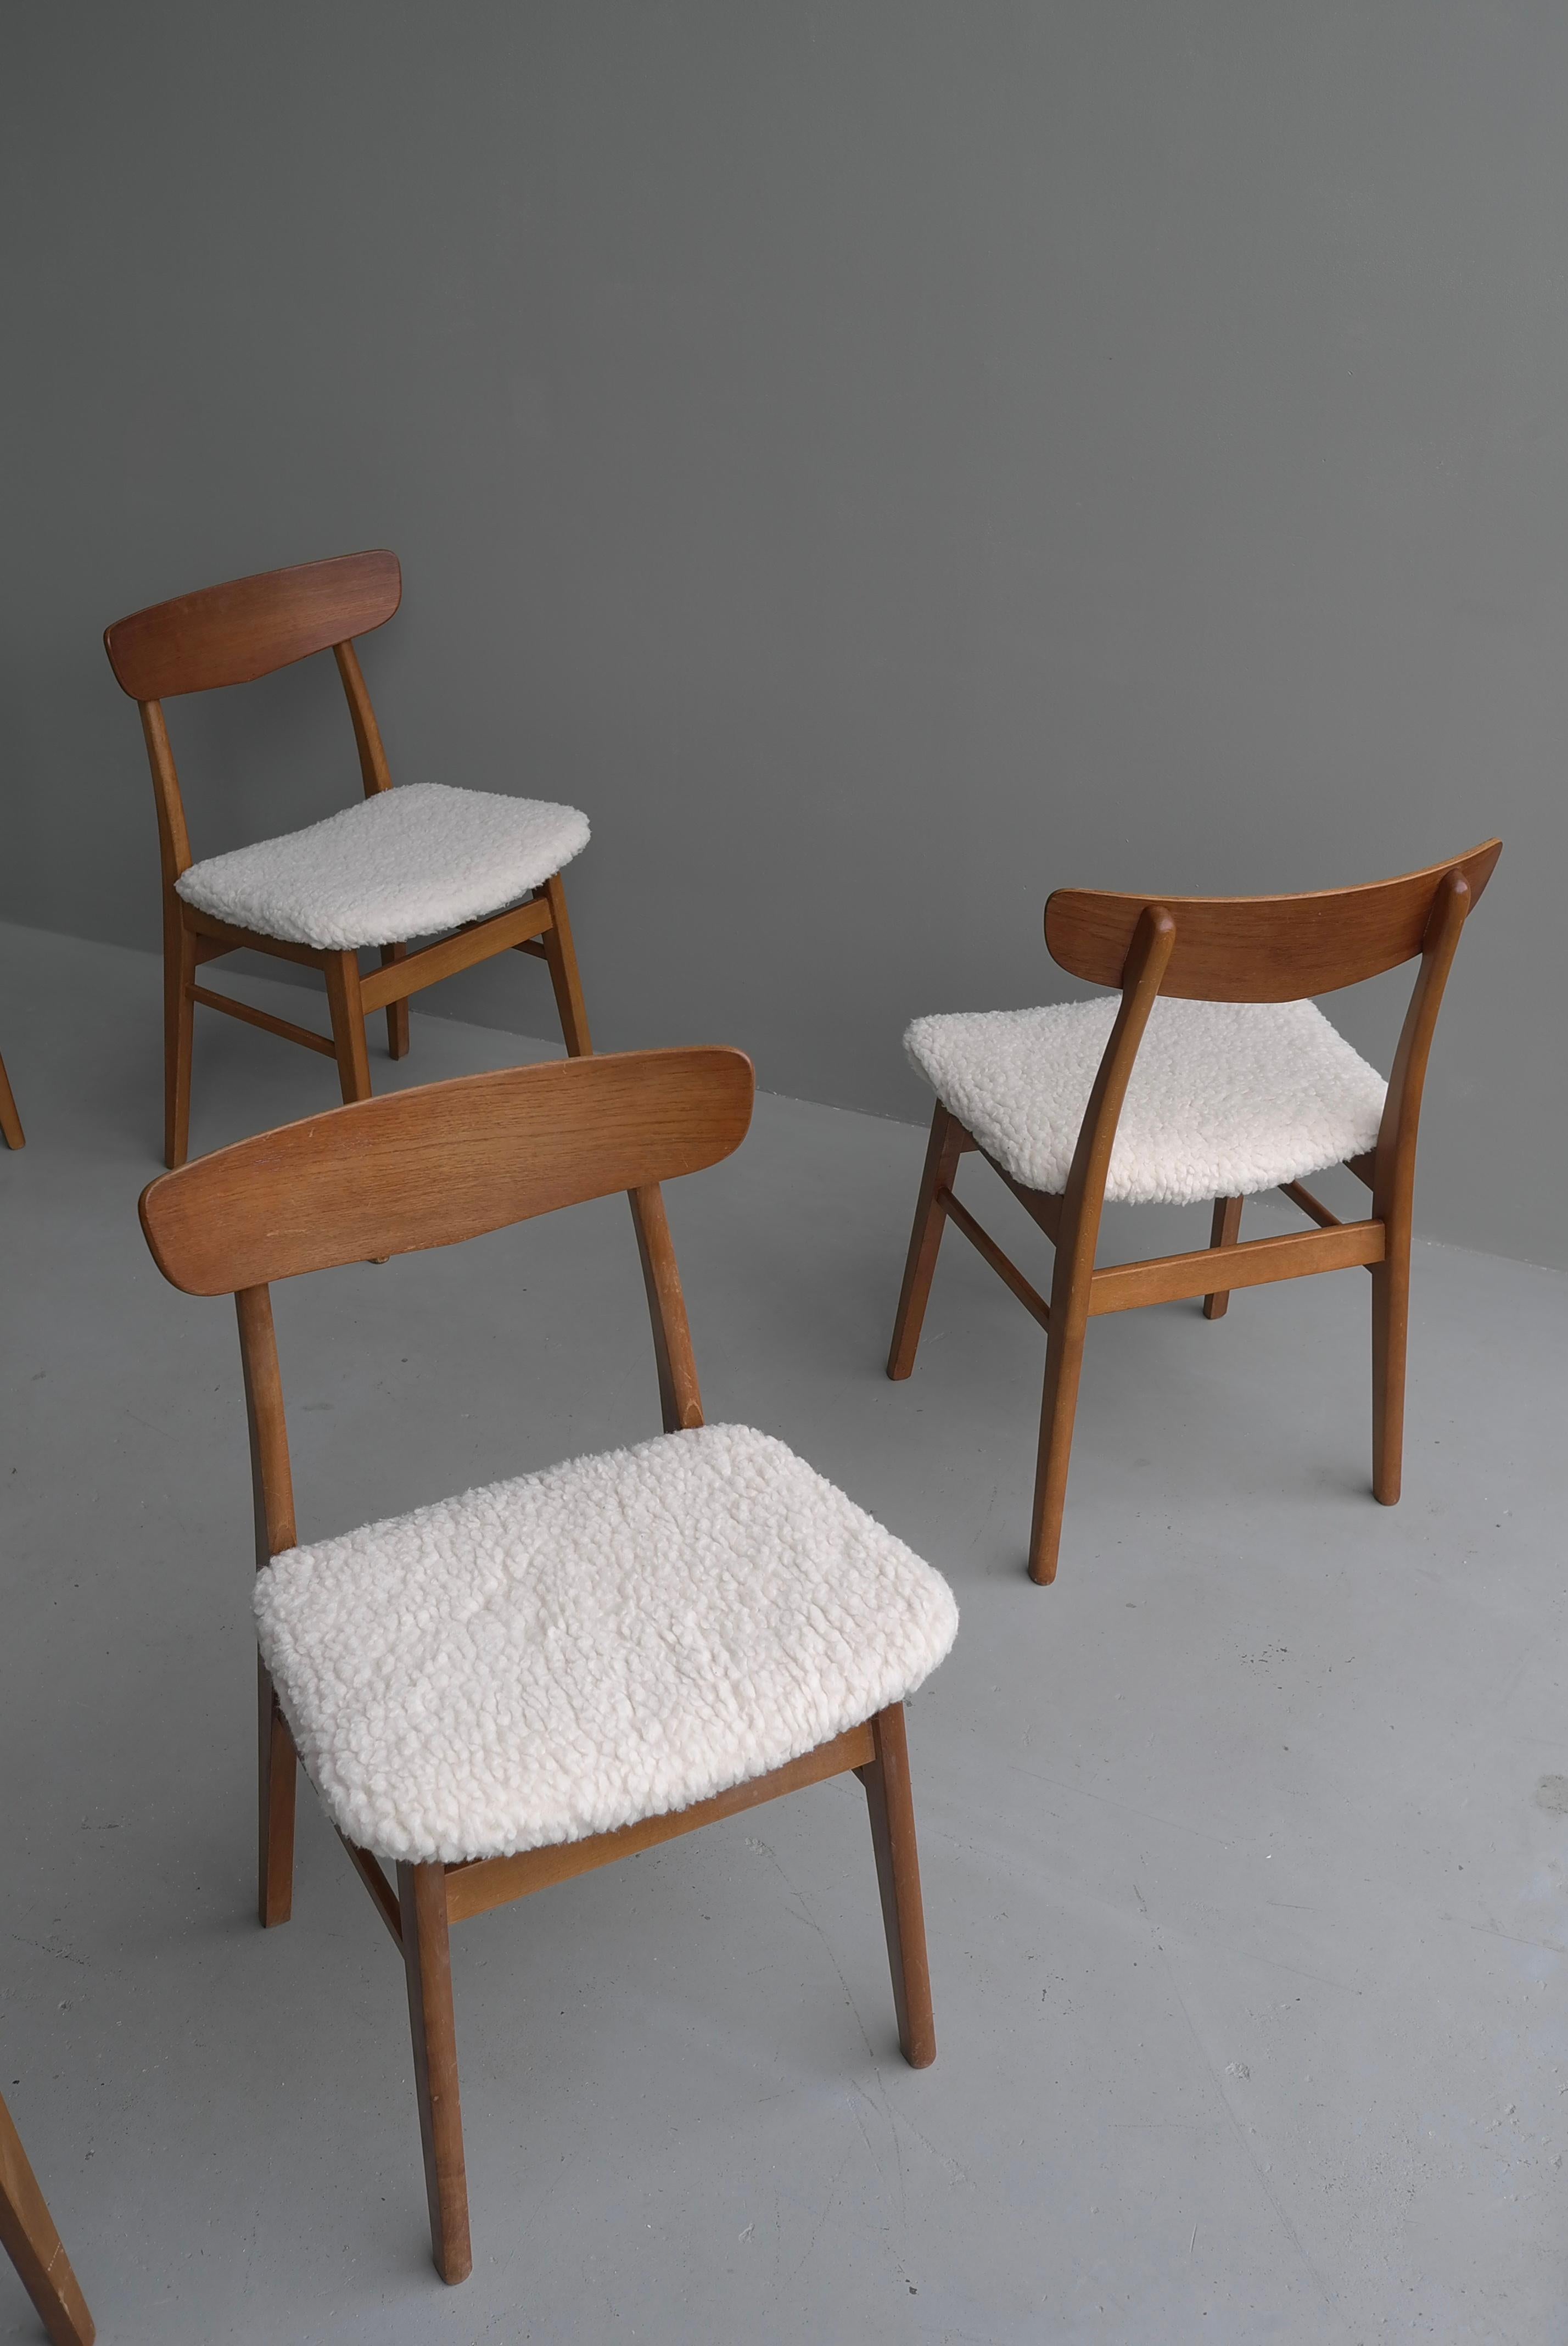 Six Teak Danish Heart Chairs with Seats in Pure Merino Wool, by Farstrup Møbler 7